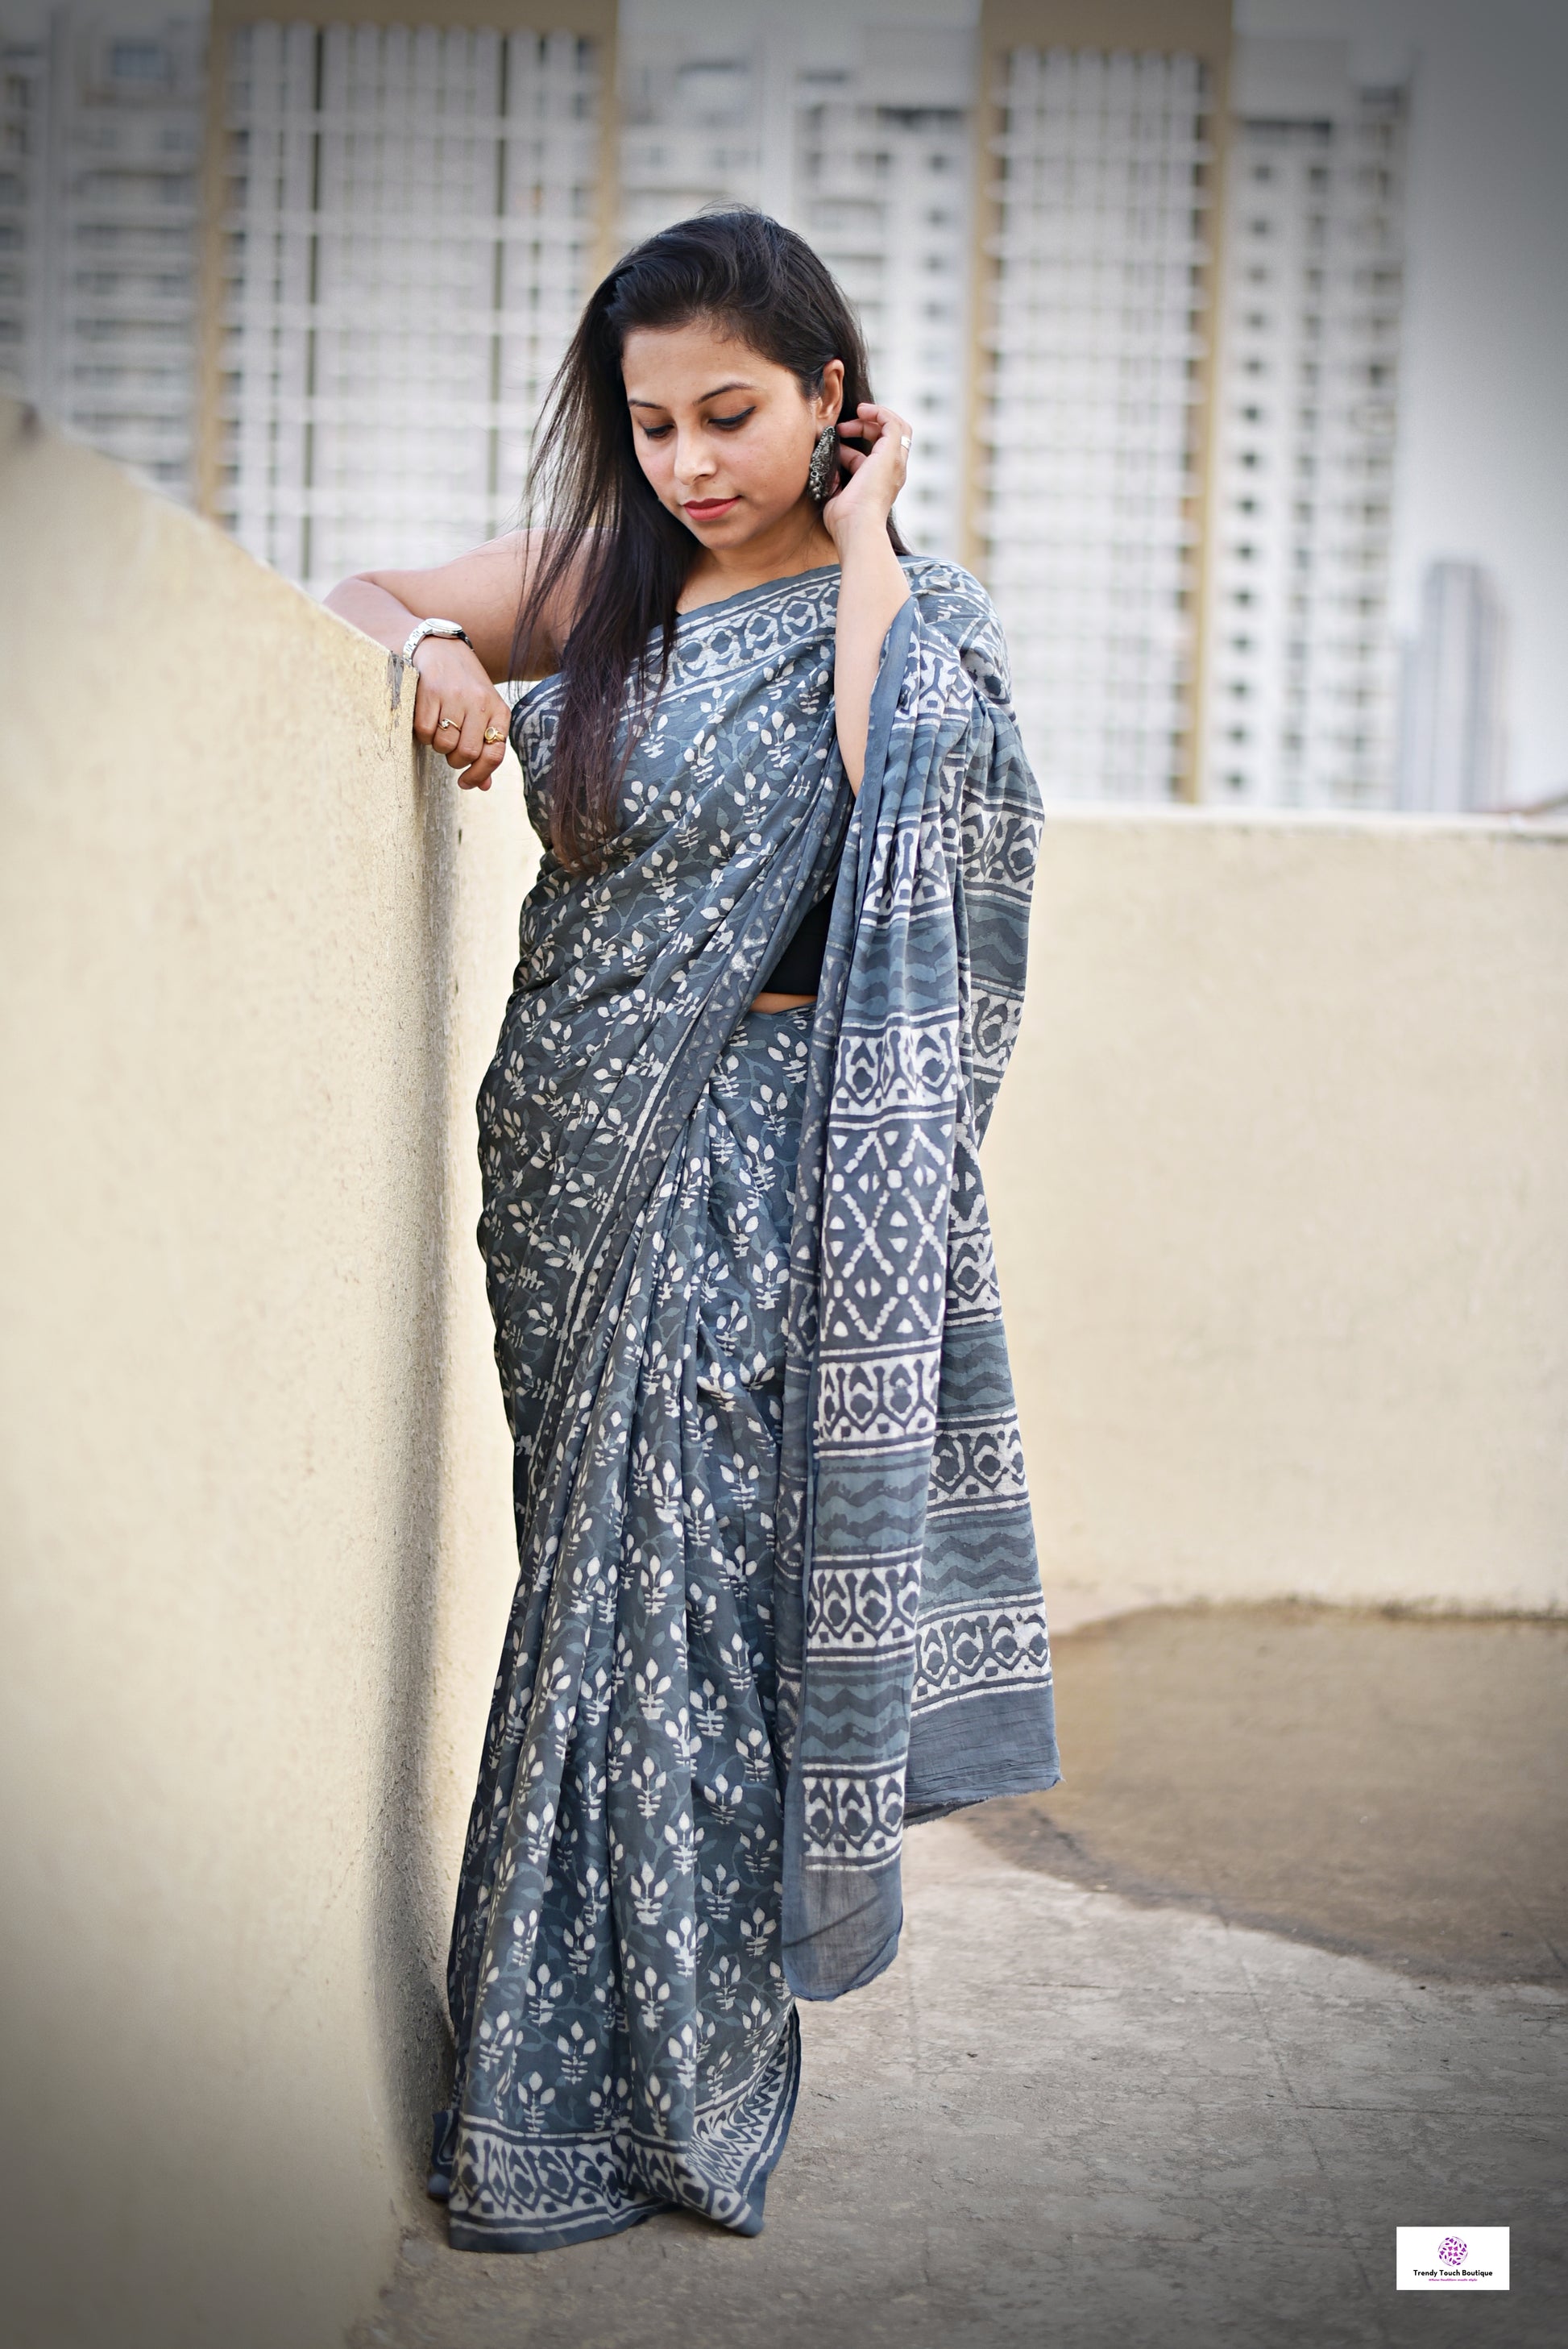 handblockprint mulcotton grey saree best summer fabric with blouse piece office and casual saree style best price